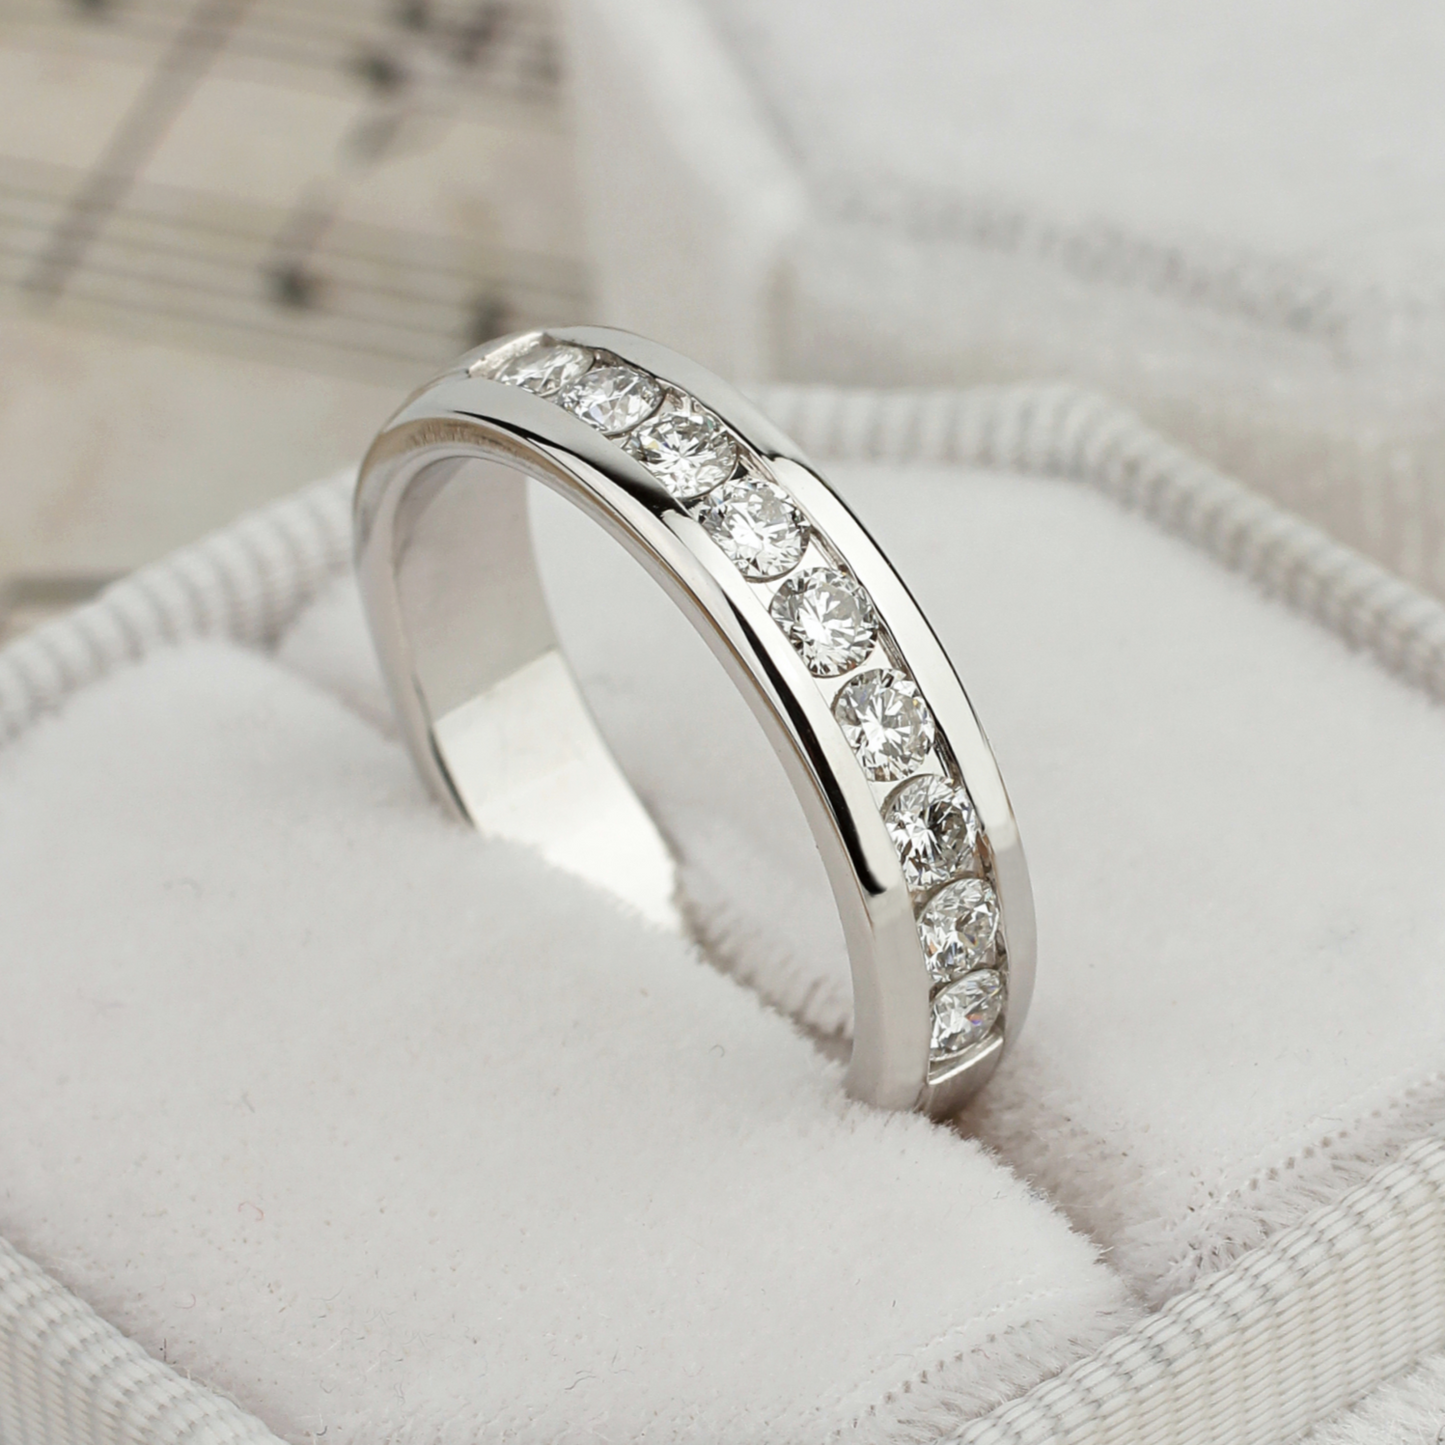 Womens wedding bands with Moissanite stones. Womens wedding ring. Wedding bands women. Bridal ring. Gold ring for women. Diamond gold band. White gold diamond band. White gold damond ring. 